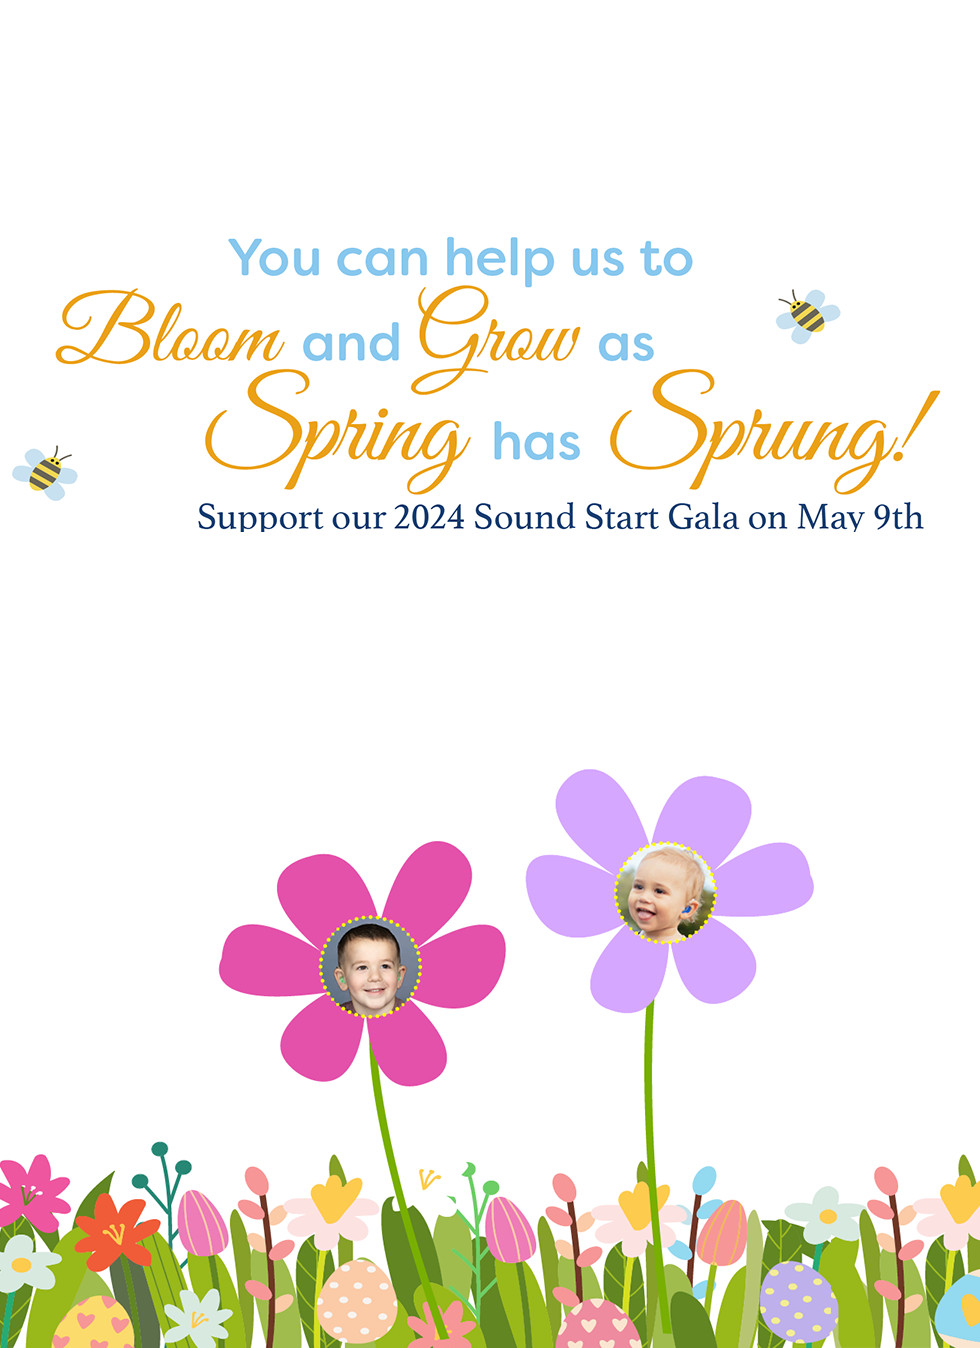 Support our 2024 Sound Start Gala on May 9th